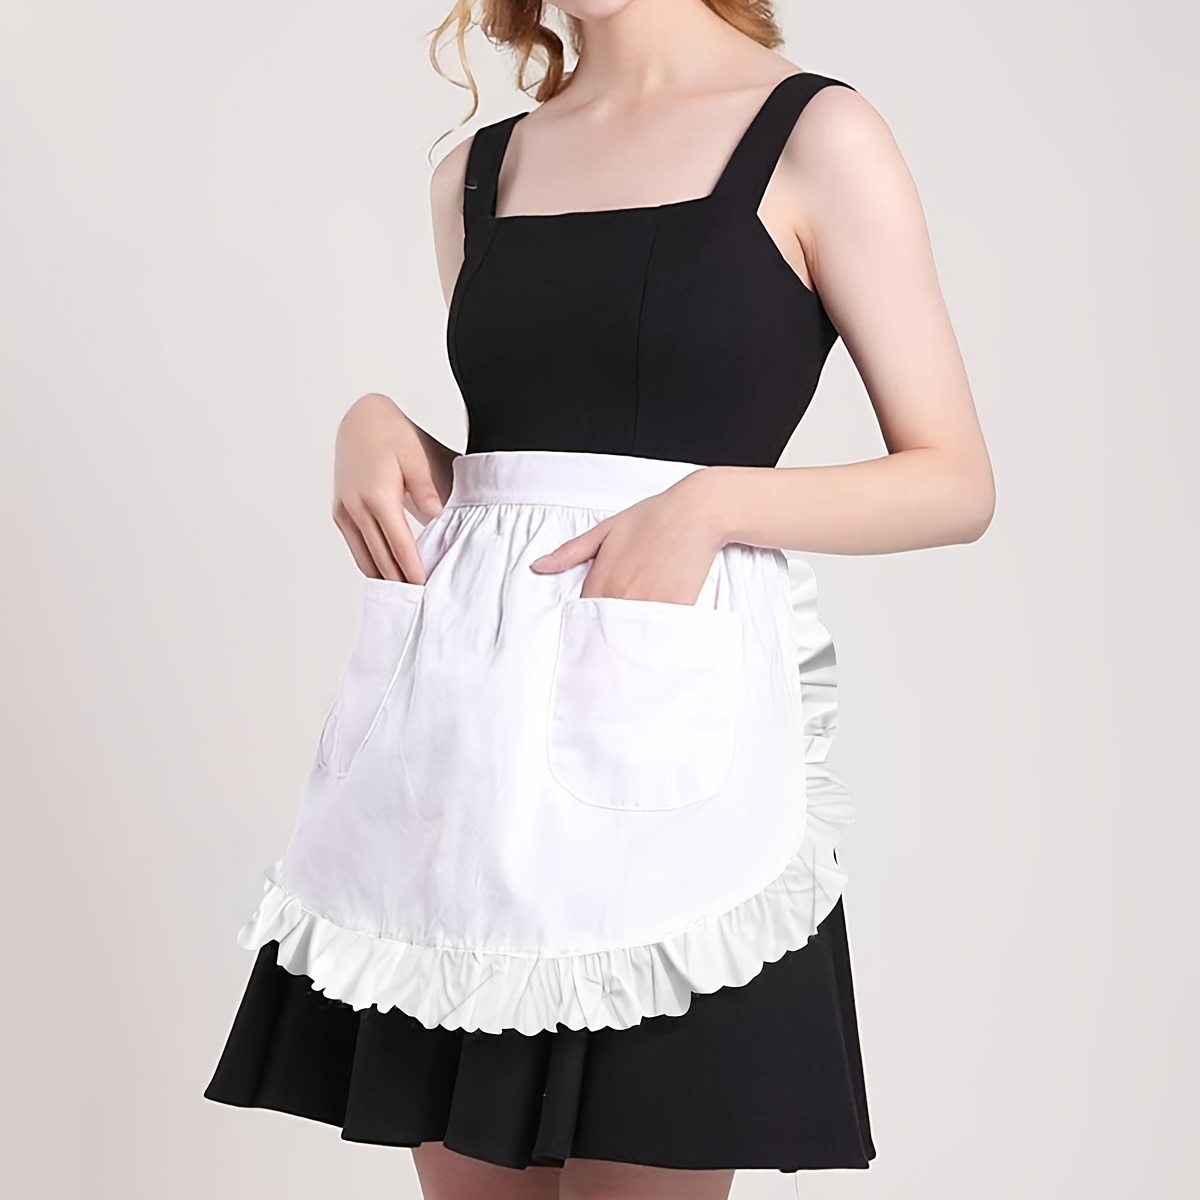 

Chic White Lace-trimmed Apron With Ruffle Detail - Polyester, Knit Fabric For Kitchen & Restaurant Use